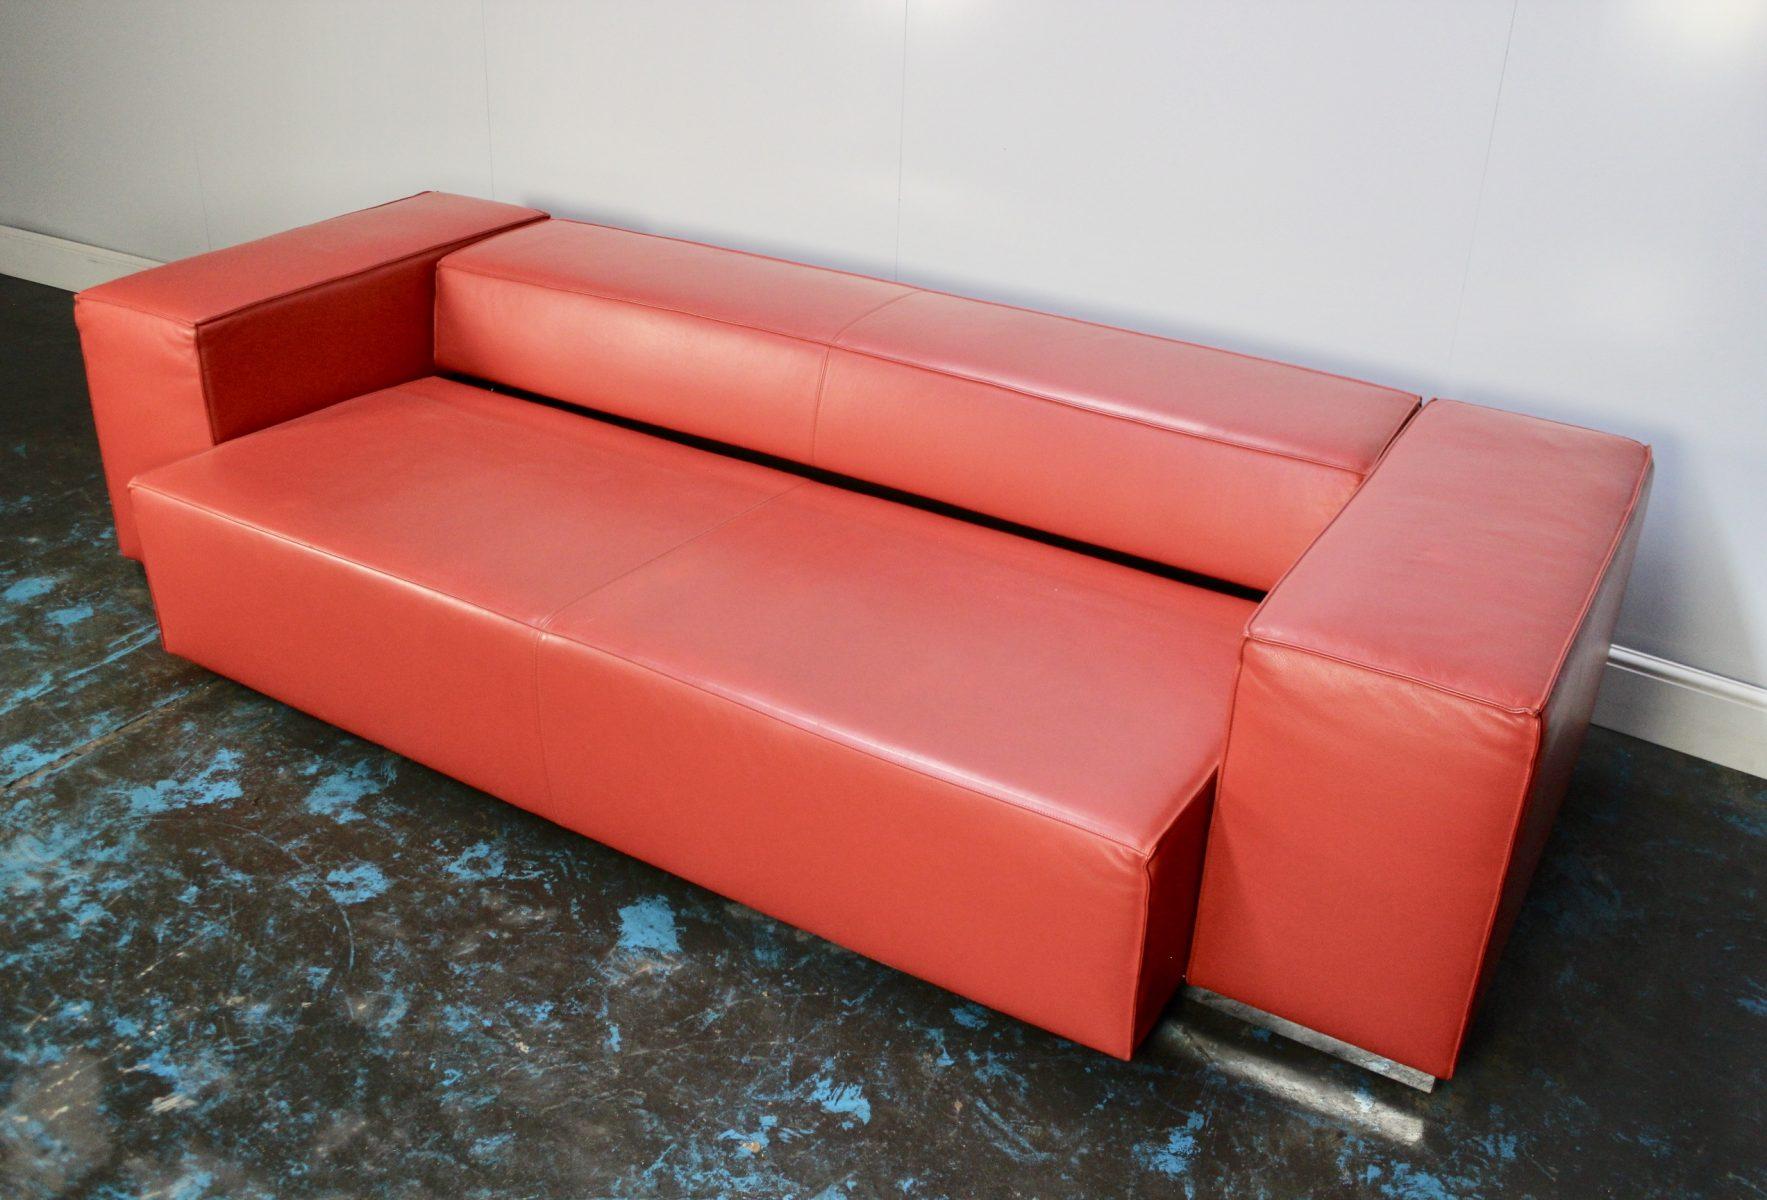 Cassina “Big Blox” 3-Seat Sofa Bed in Deep Red Leather 3